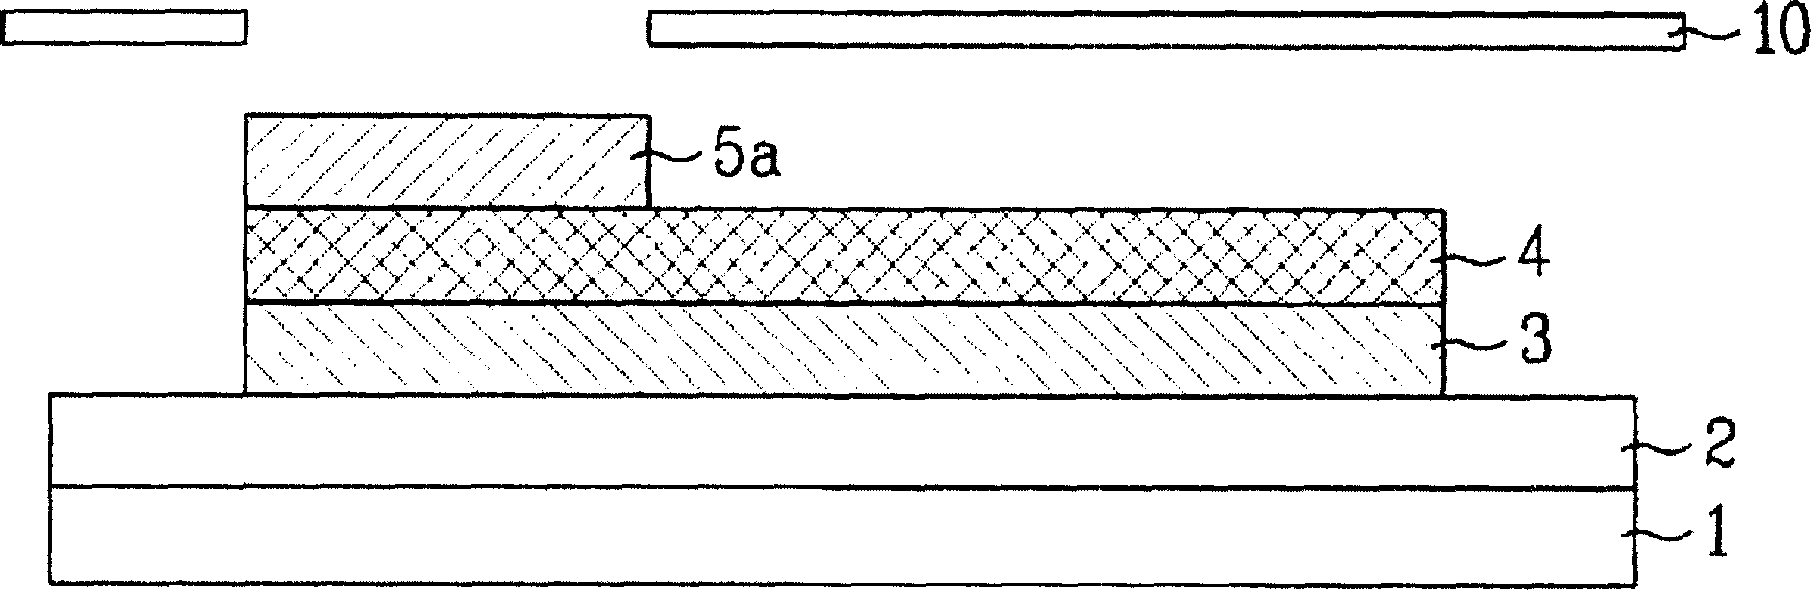 Organic electroluminescent device and method for fabricating the same